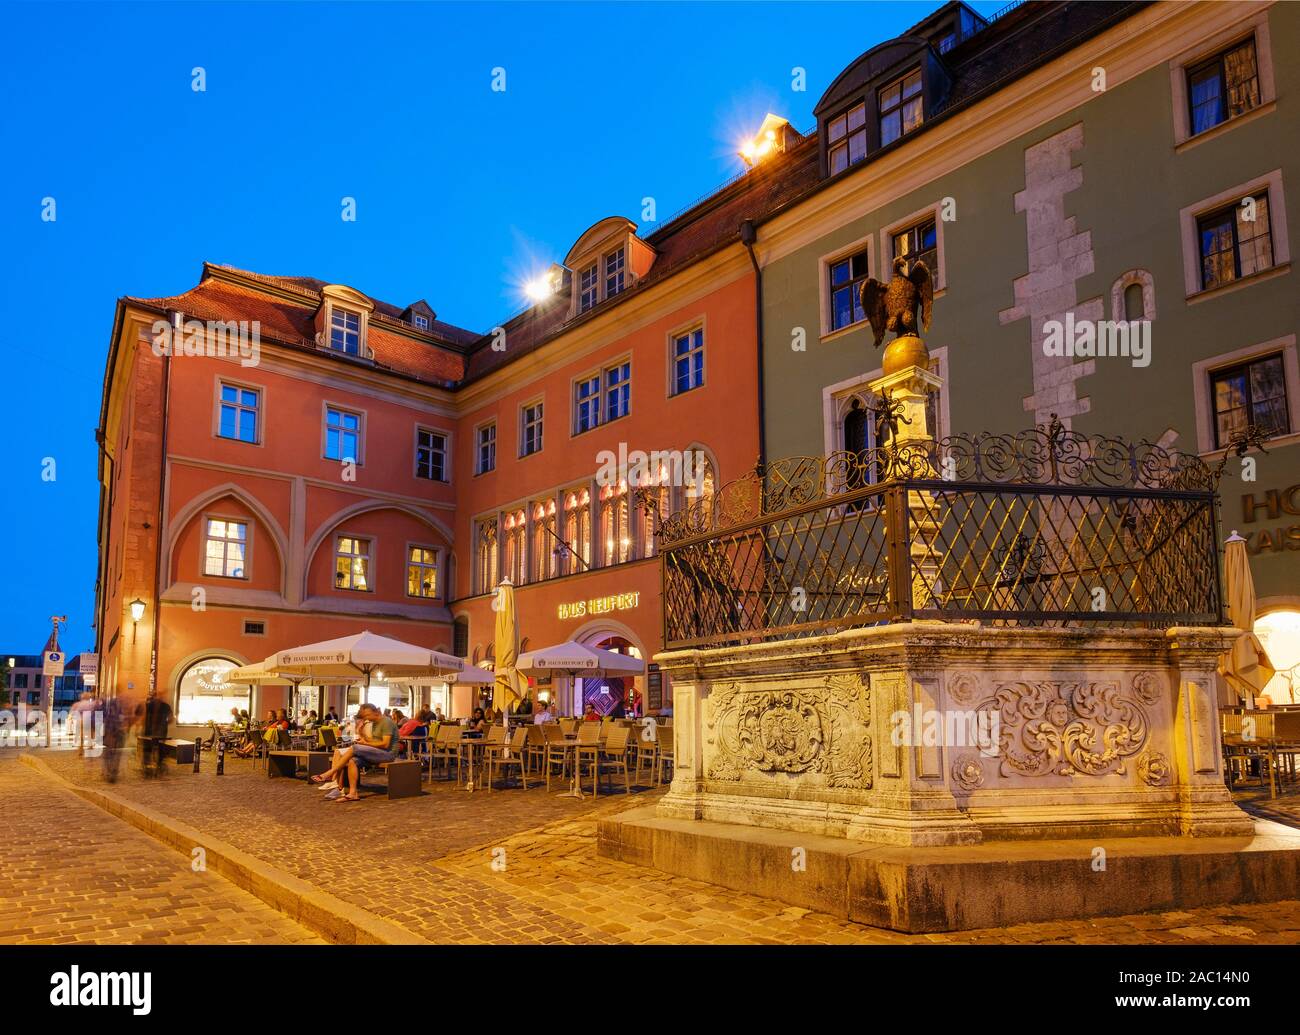 Egle fountain and House Heuport, Herb Market, Old Town, Regensburg, Upper Palatinate, Bavaria, Germany Stock Photo